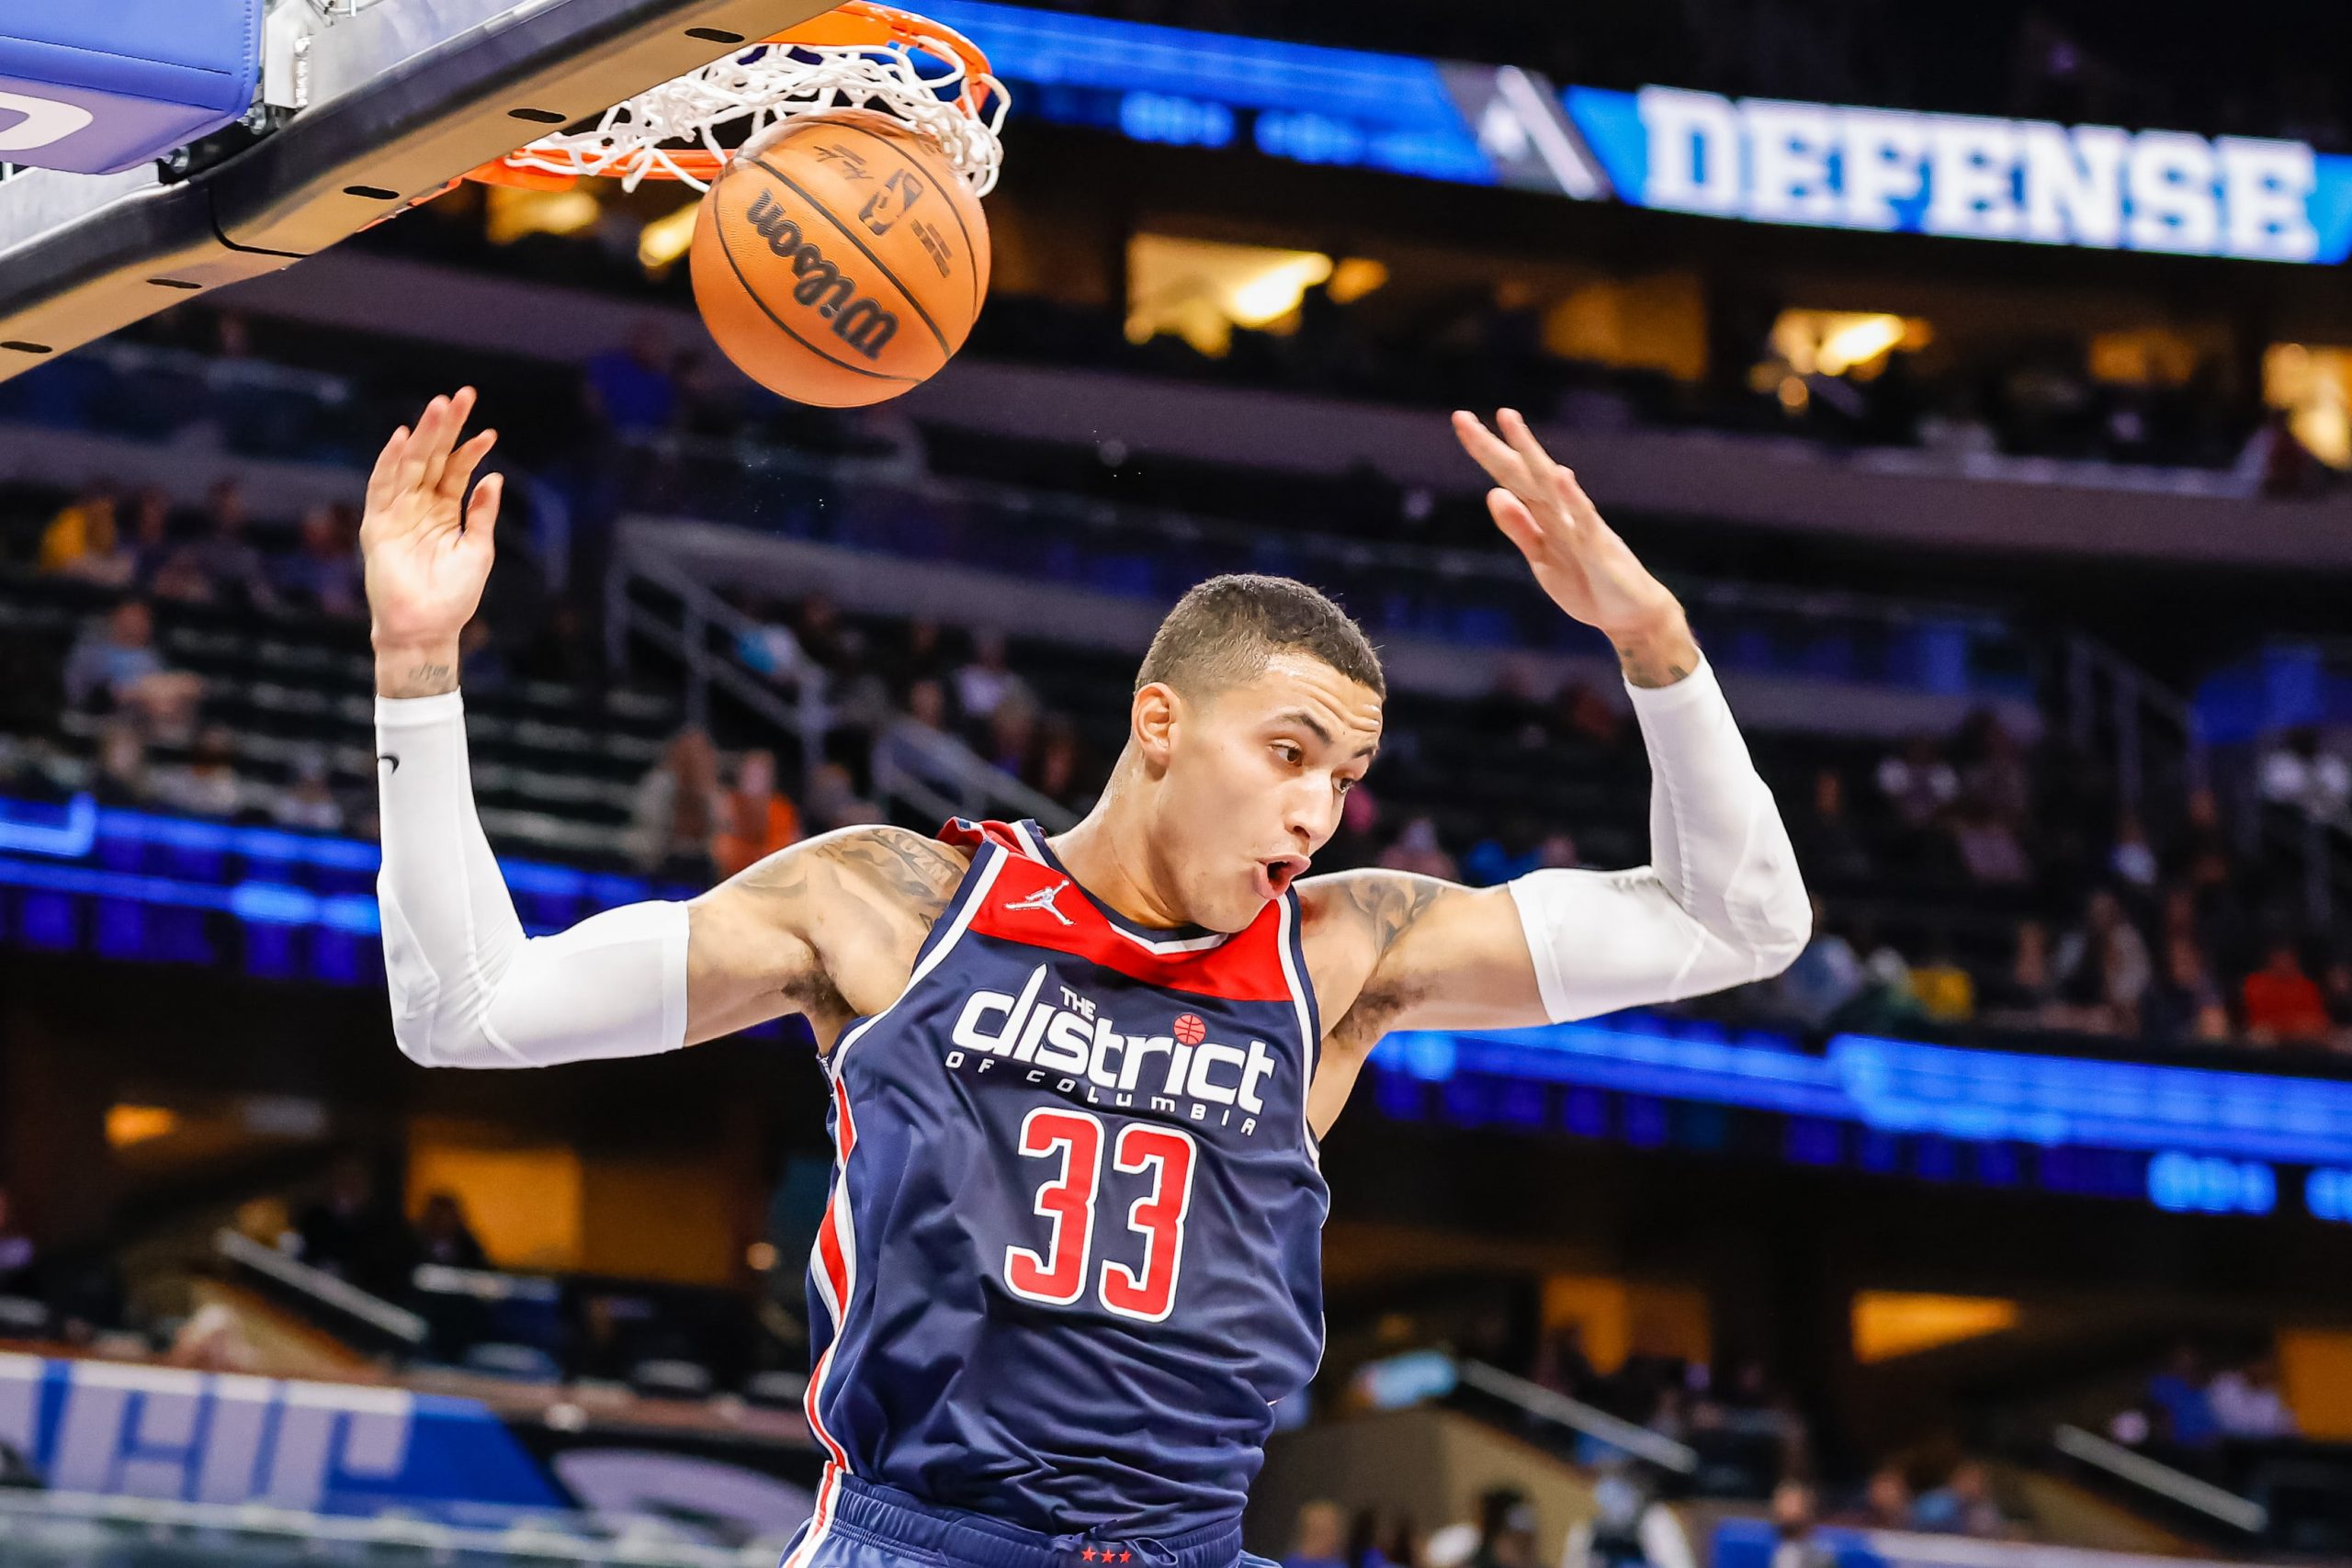 Washington Wizards forward Kyle Kuzma (33) dunks the ball against the Orlando Magic during the first quarter at Amway Center.